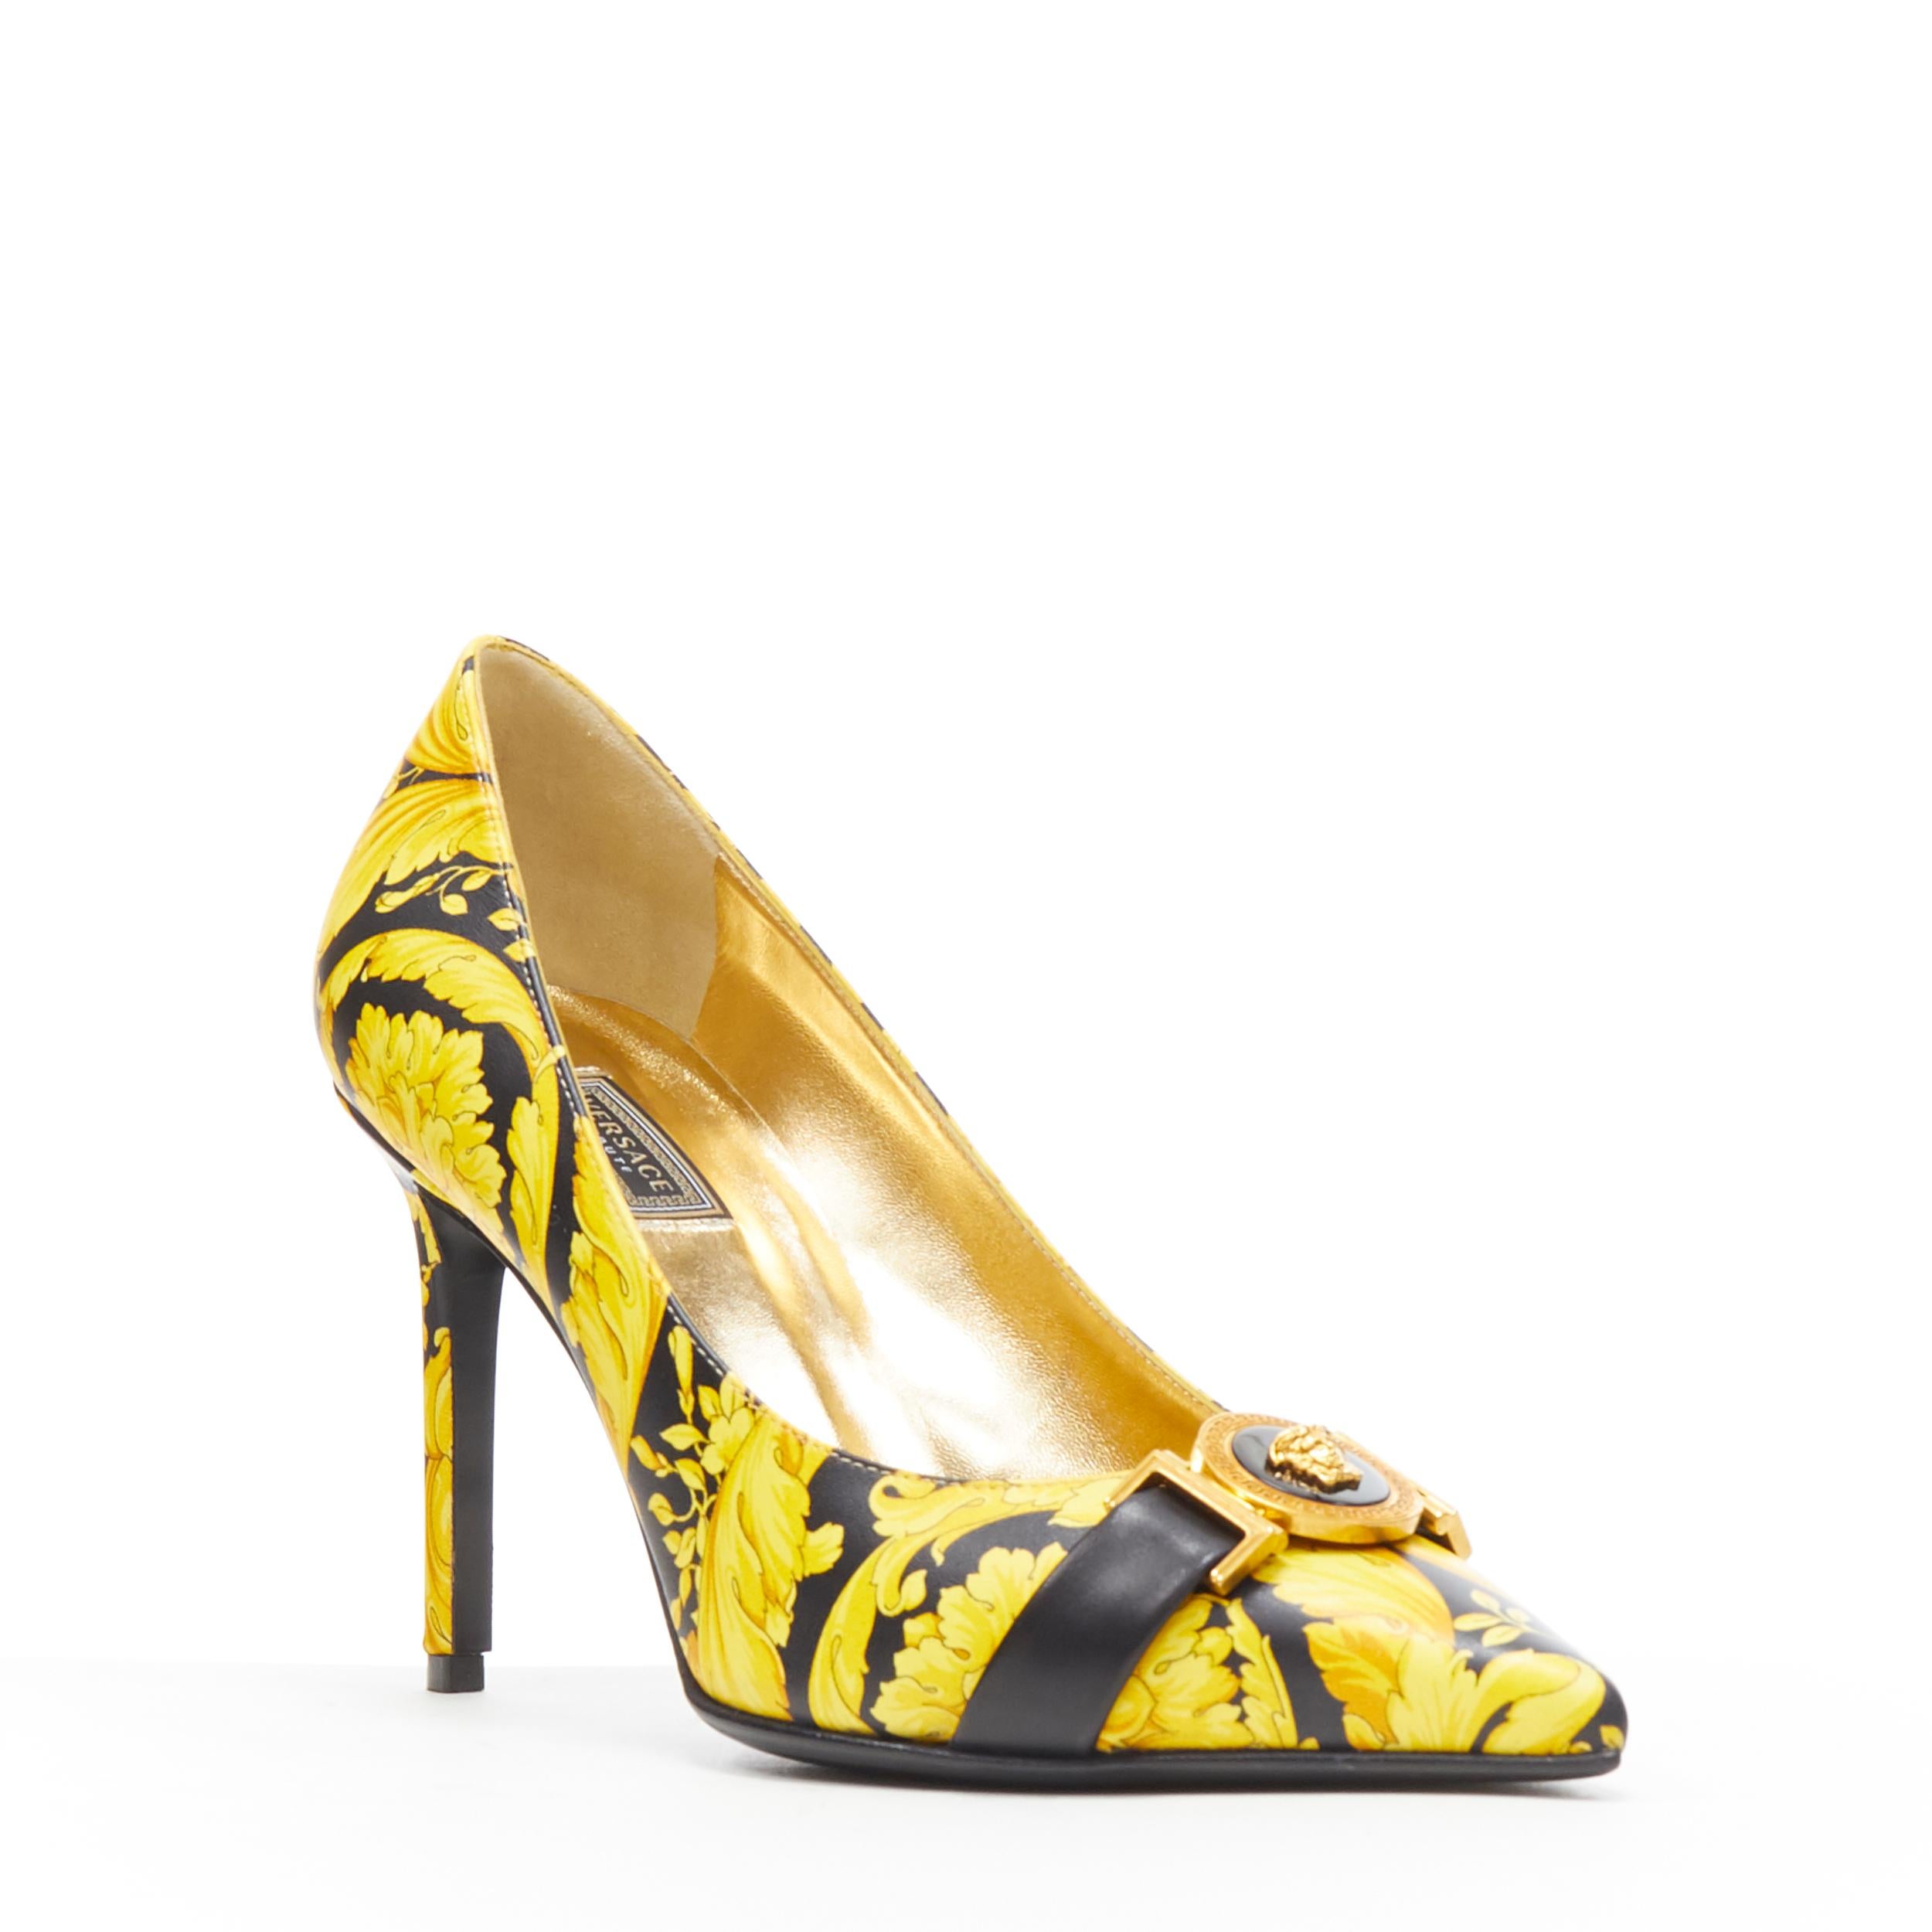 new VERSACE 1992 Tribute Baroque Hibiscus barocco Medusa strap leather pump EU39
Brand: Versace
Designer: Donatella Versace
Collection: Spring Summer 2018
Model Name / Style: Baroque pump
Material: Leather
Color: Gold, black
Pattern: Floral
Extra